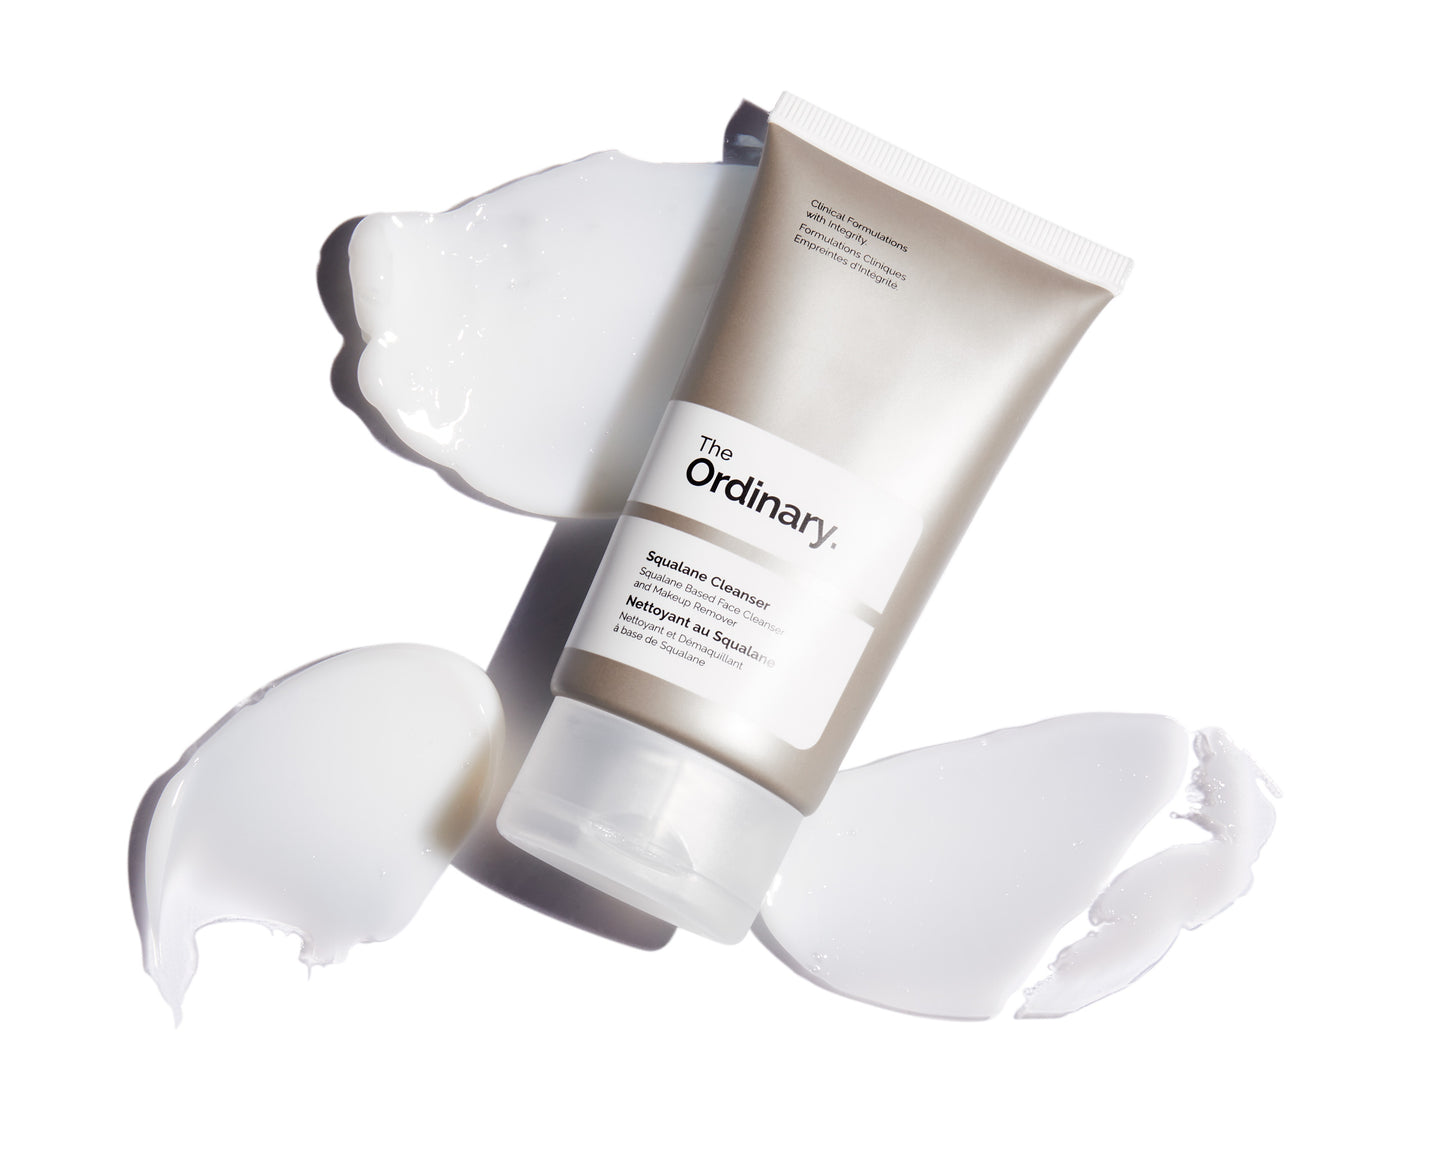 Squalane cleanser The Ordinary